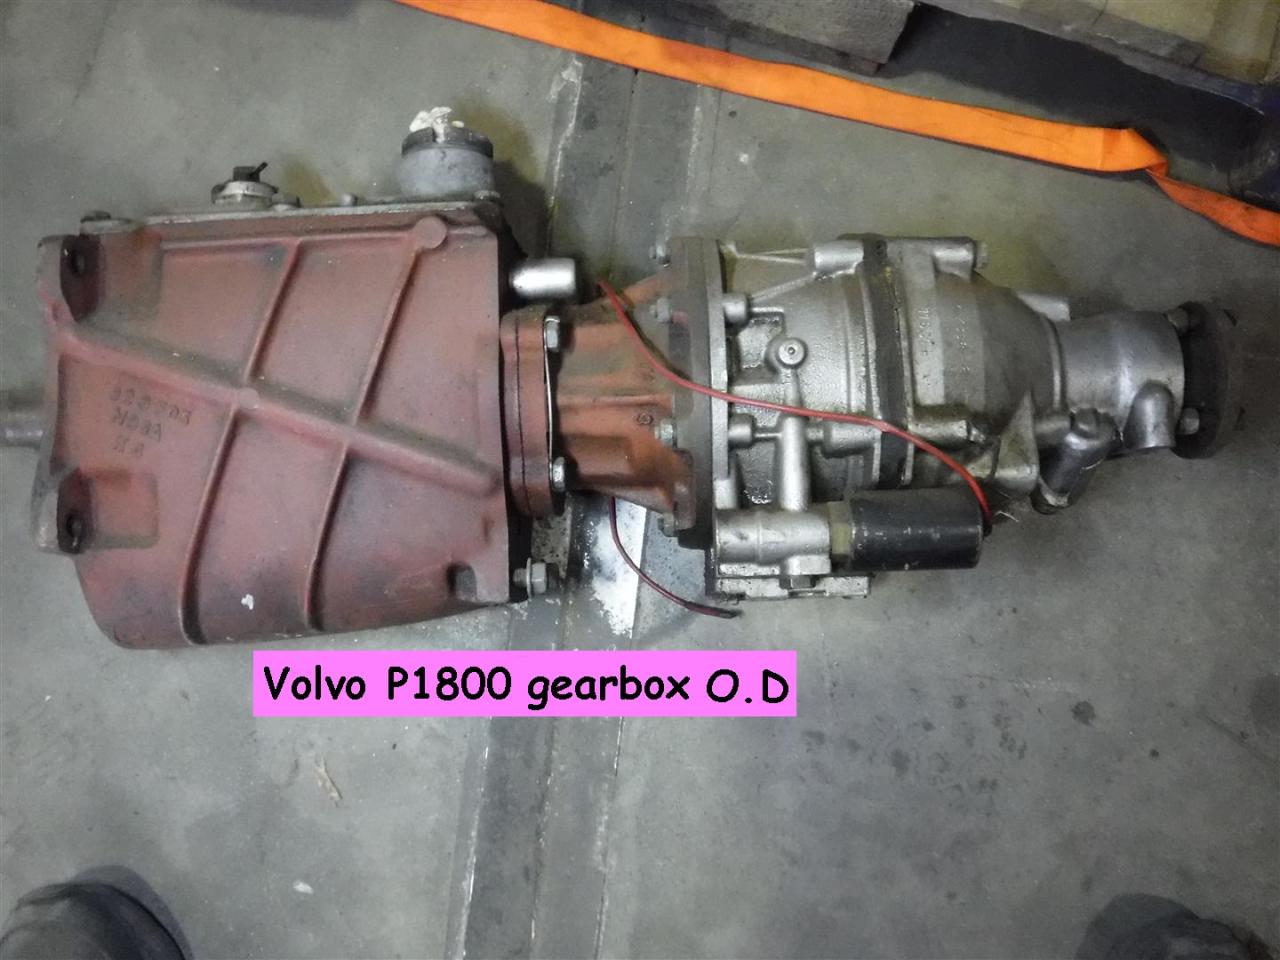 1900 Volvo parts gearbox overdrive